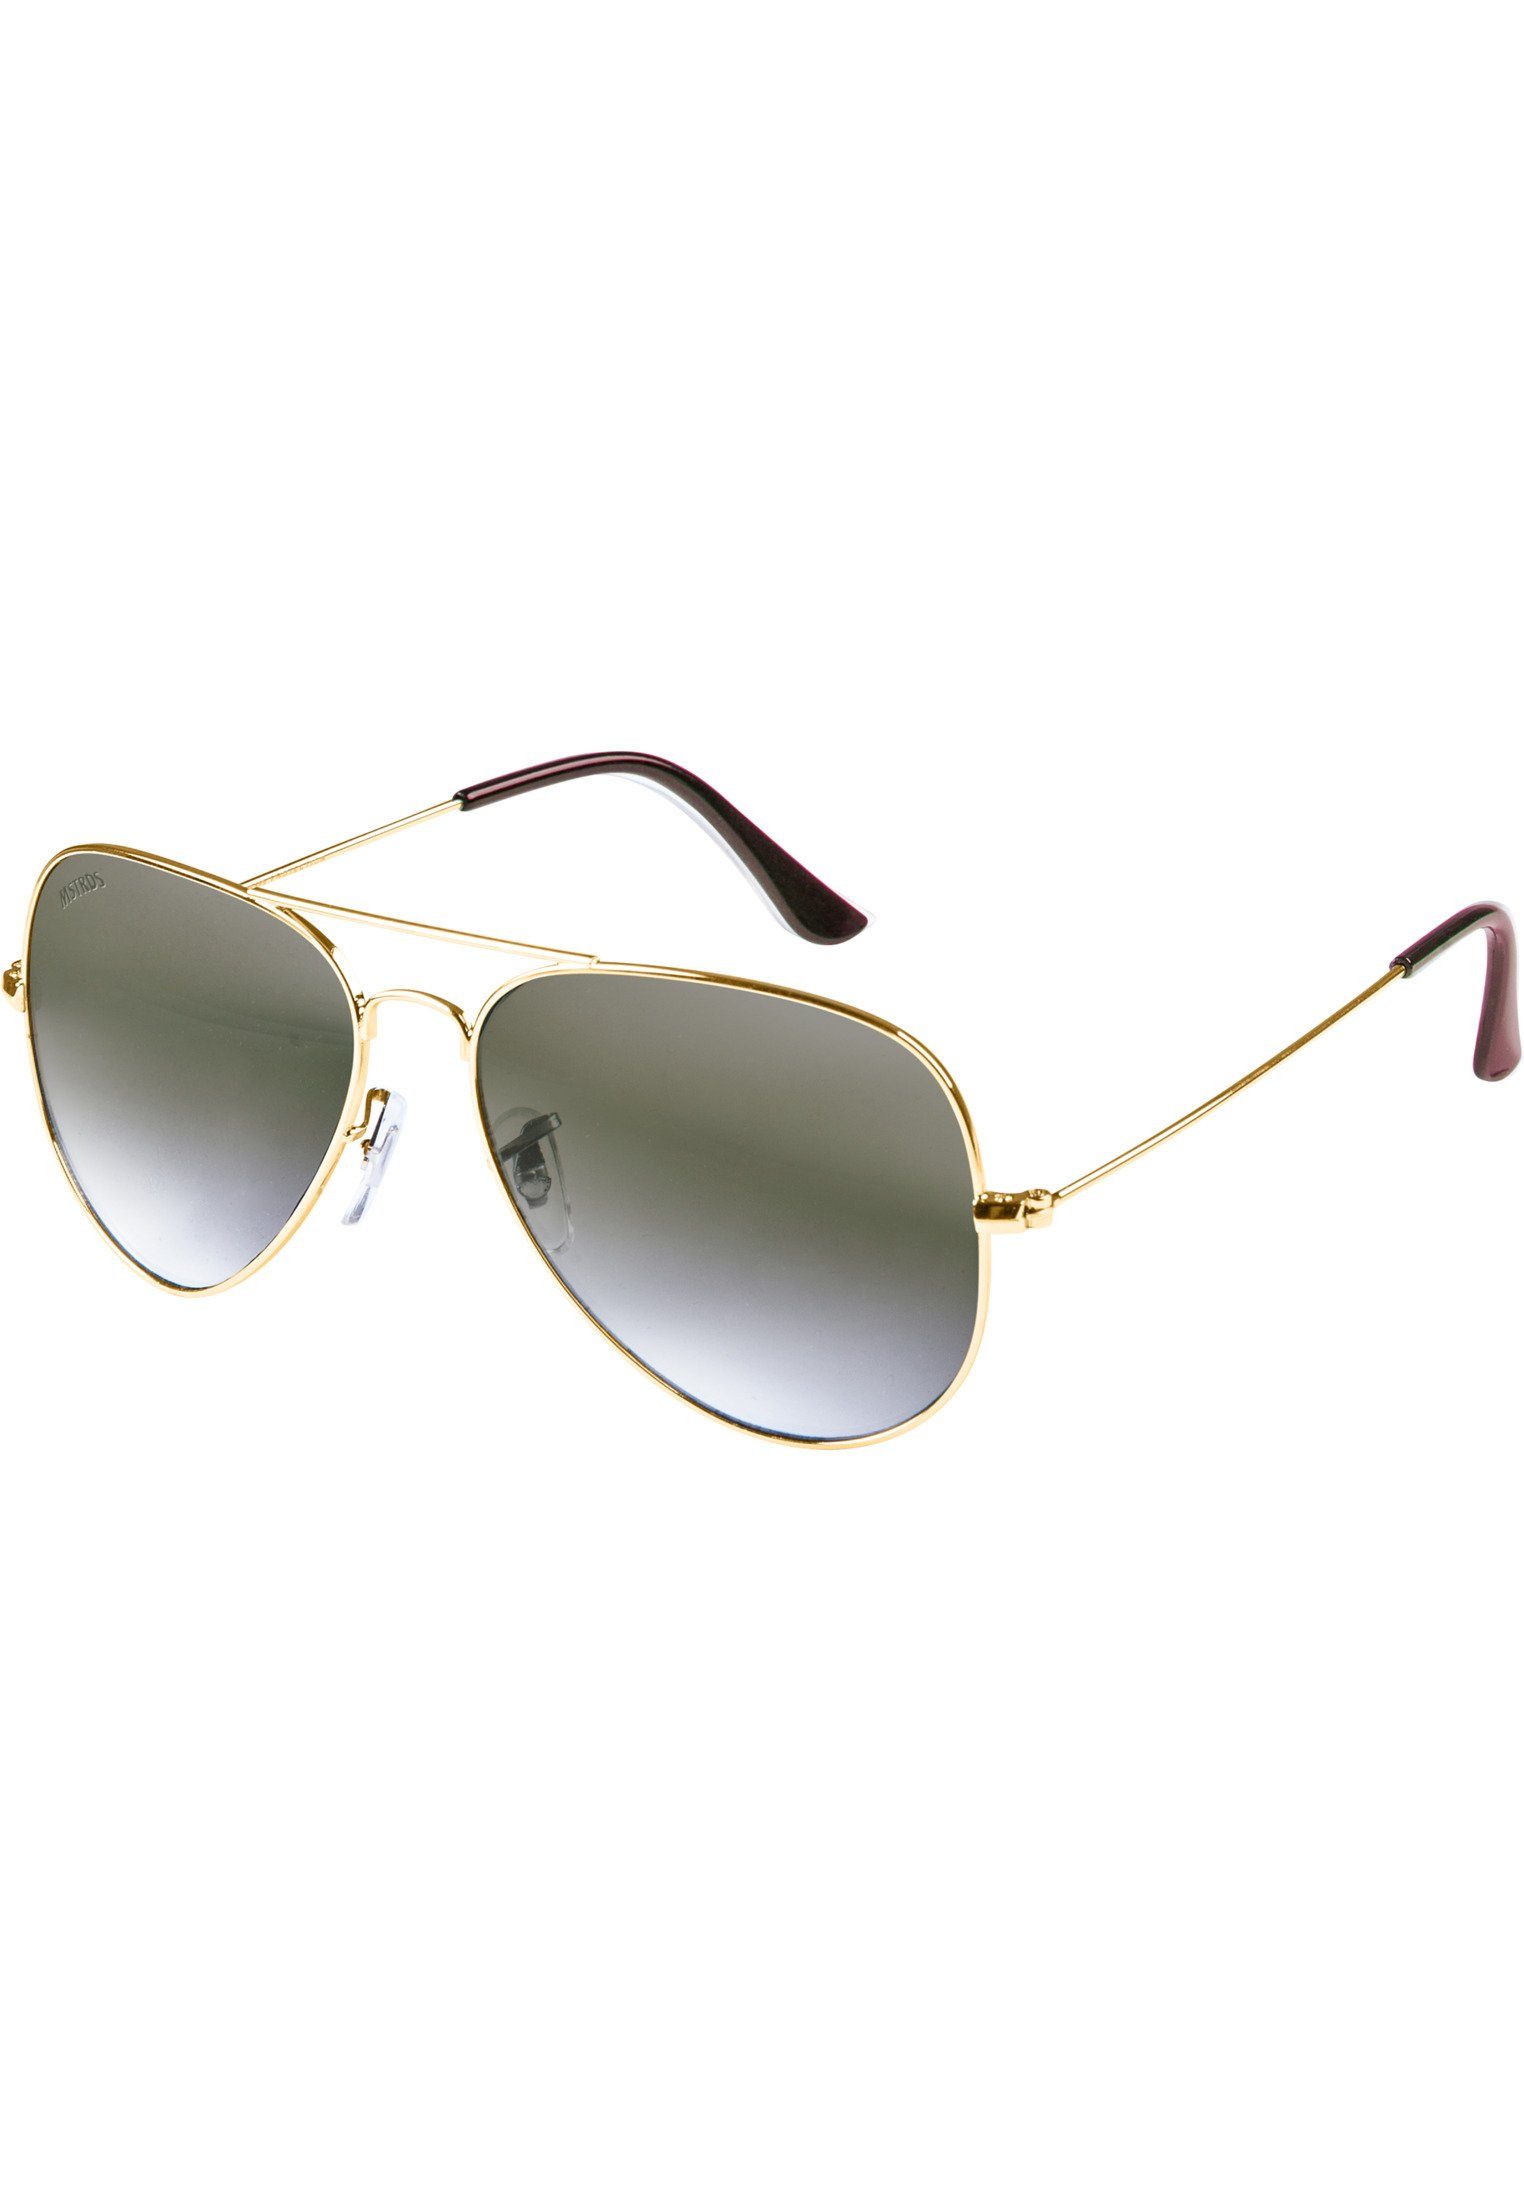 MSTRDS Sonnenbrille PureAv Youth gold/grey Accessoires Sunglasses